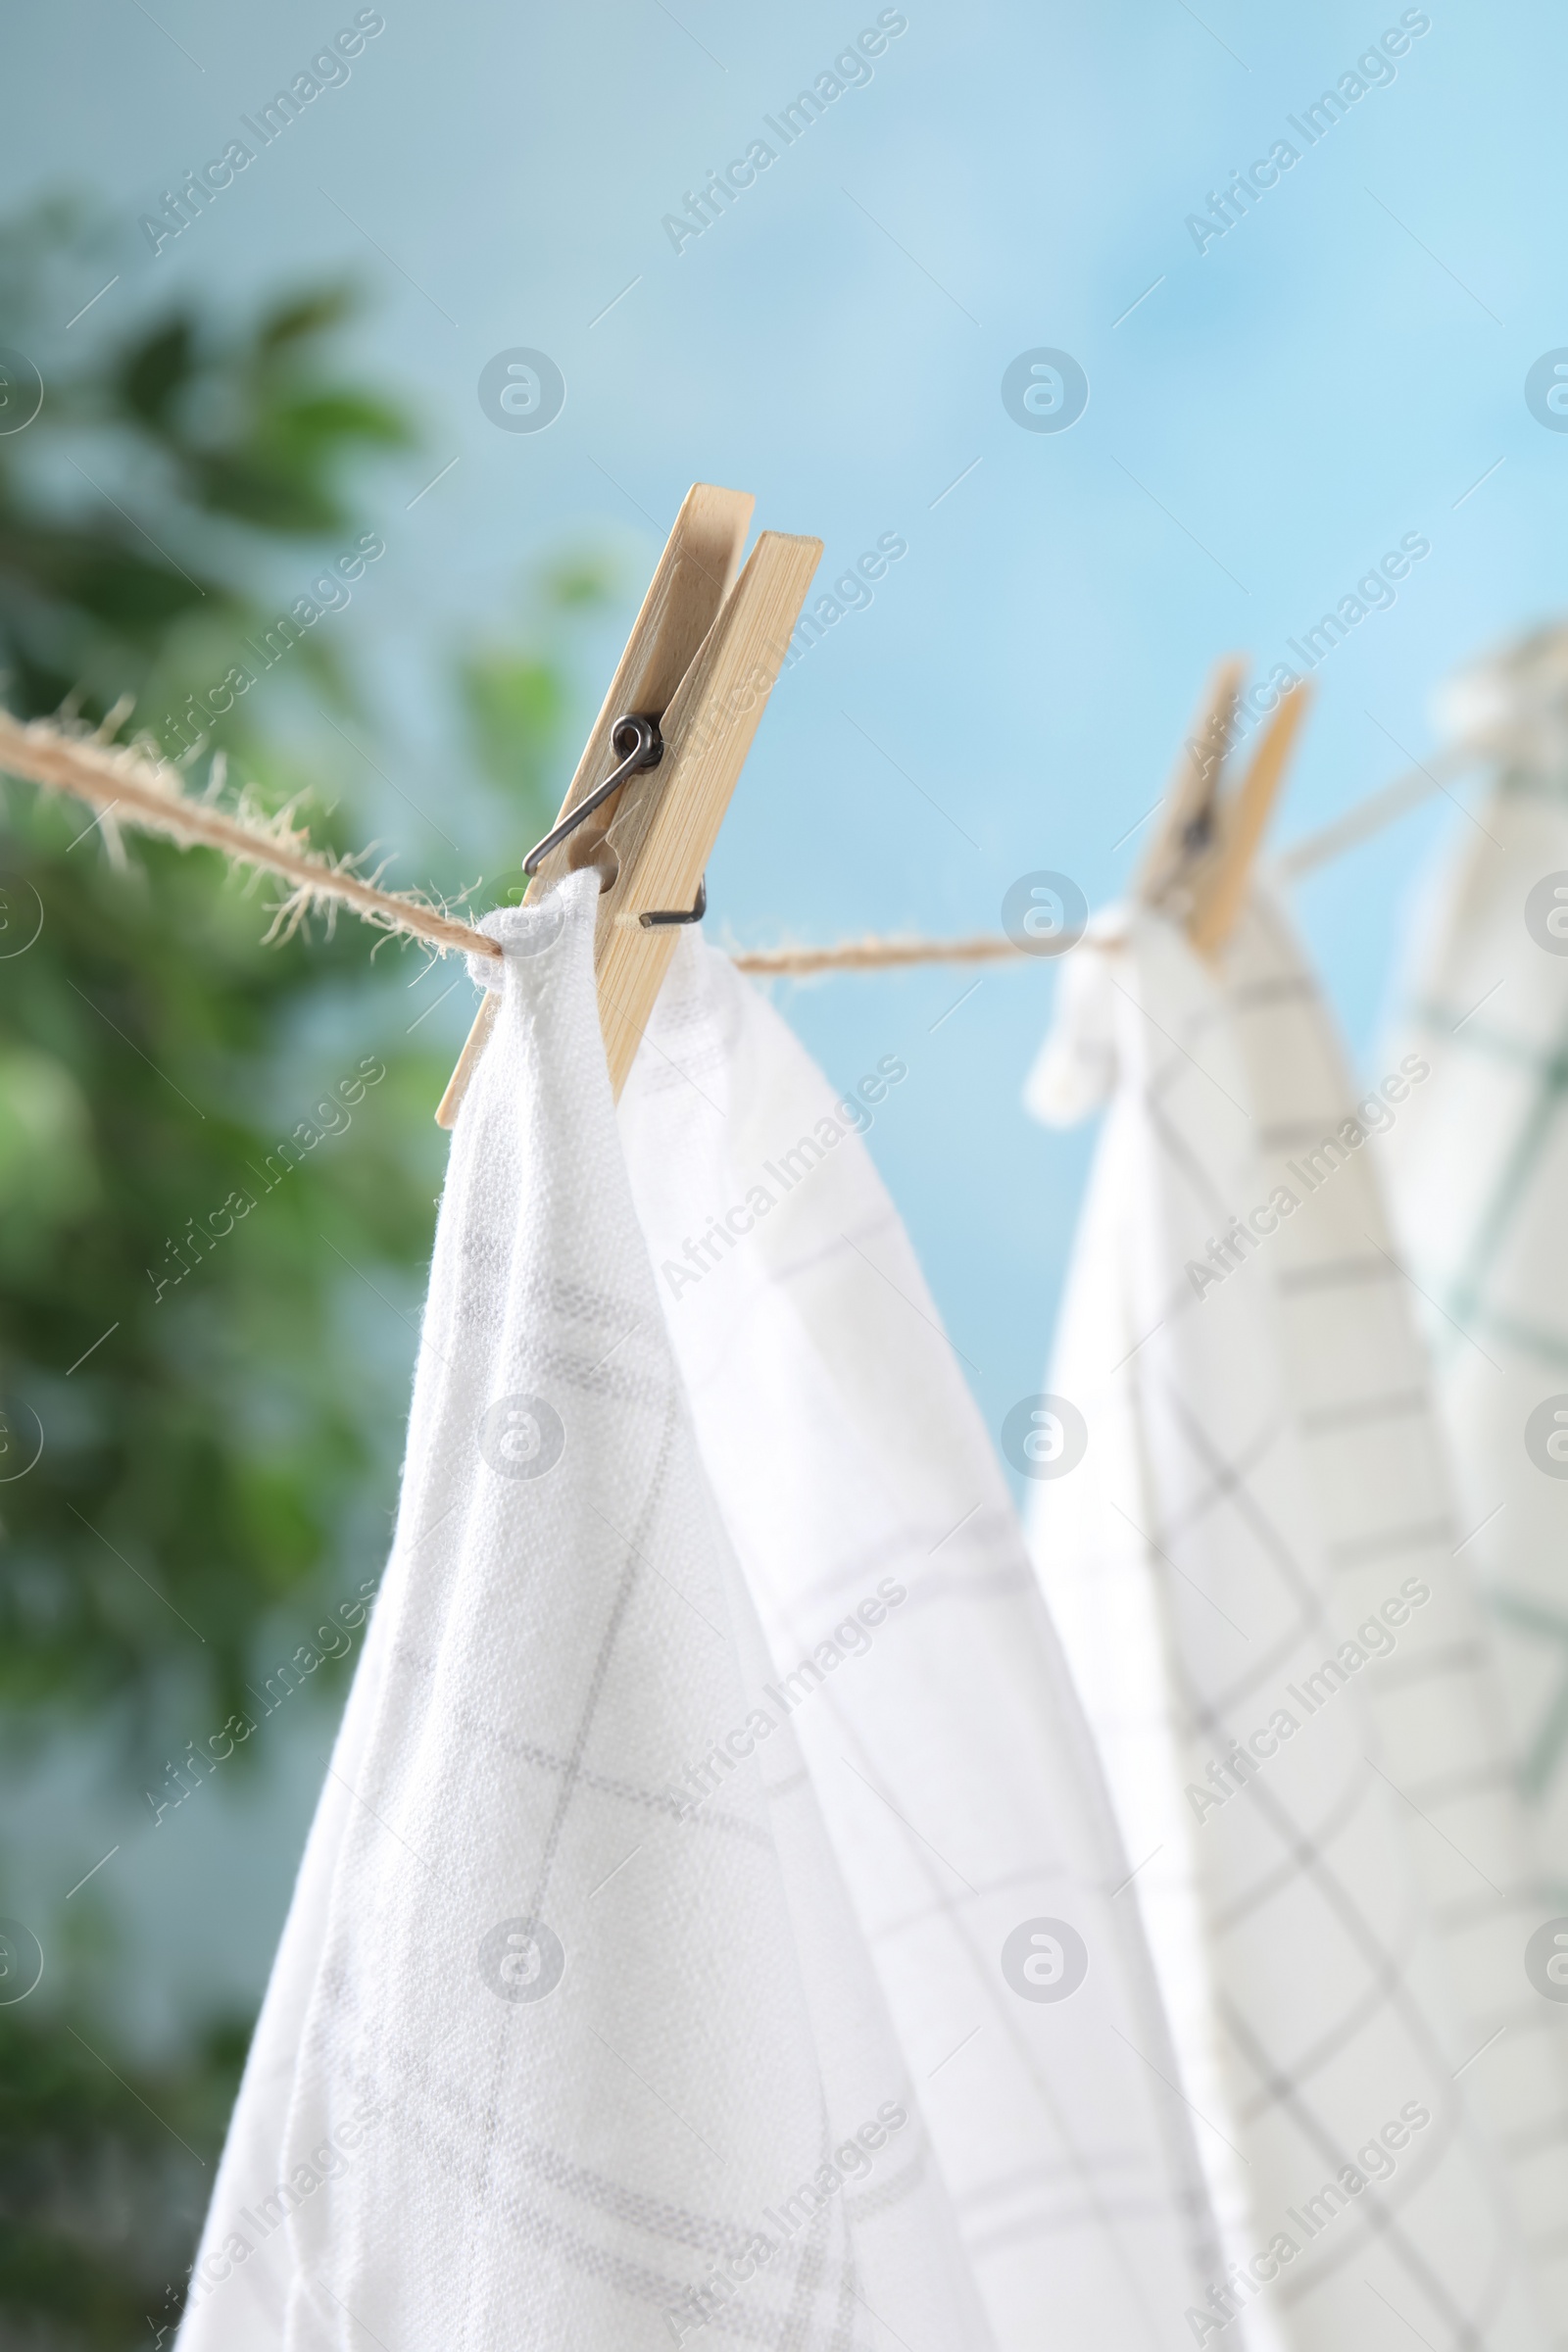 Photo of Washing line with wooden clothespins and fabrics against blurred background